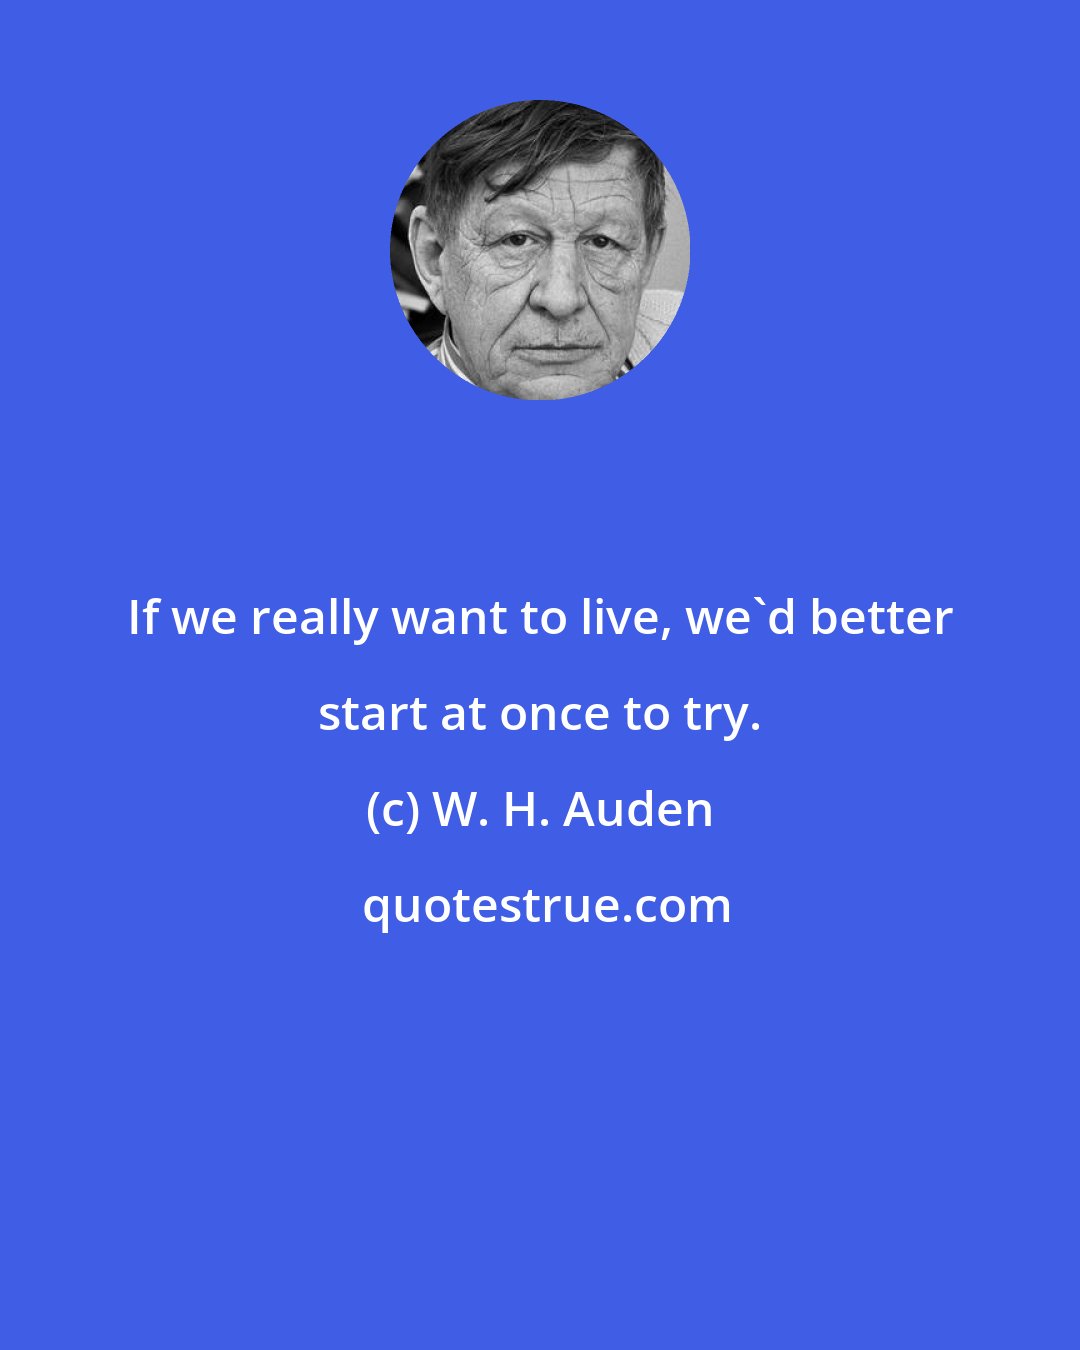 W. H. Auden: If we really want to live, we'd better start at once to try.